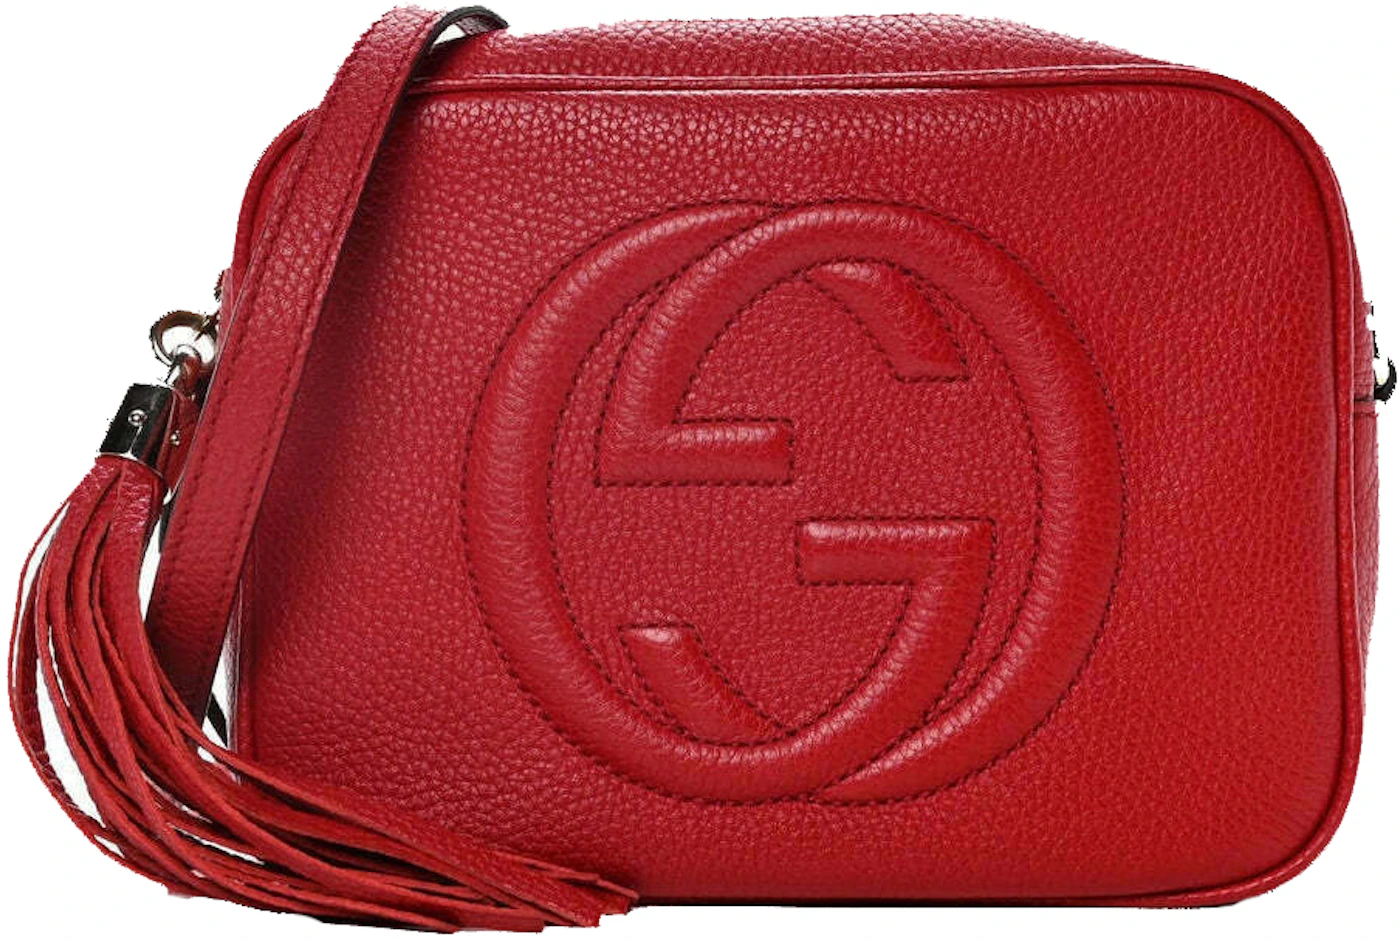 Gucci Red bag